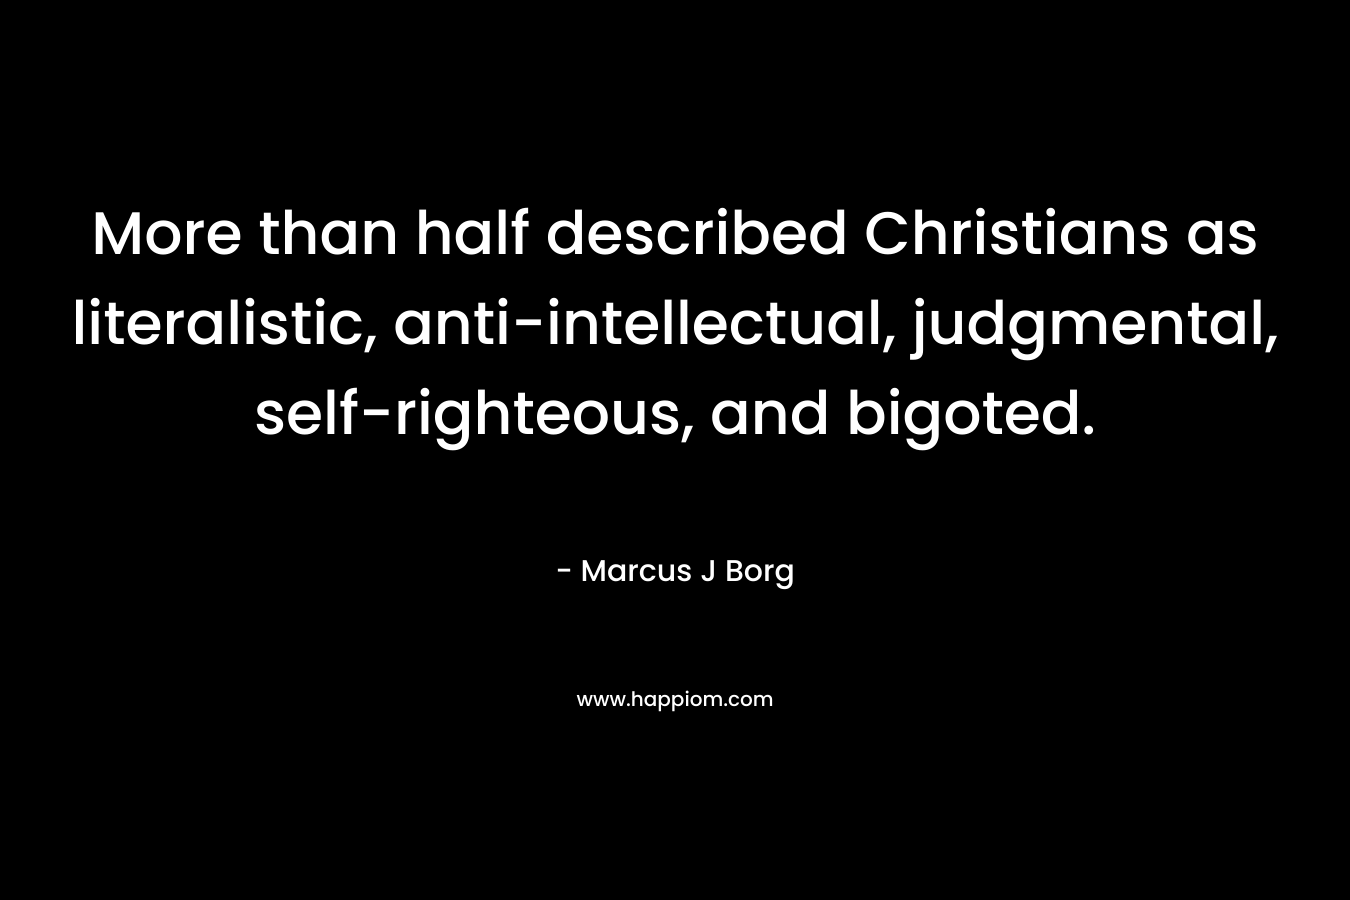 More than half described Christians as literalistic, anti-intellectual, judgmental, self-righteous, and bigoted.